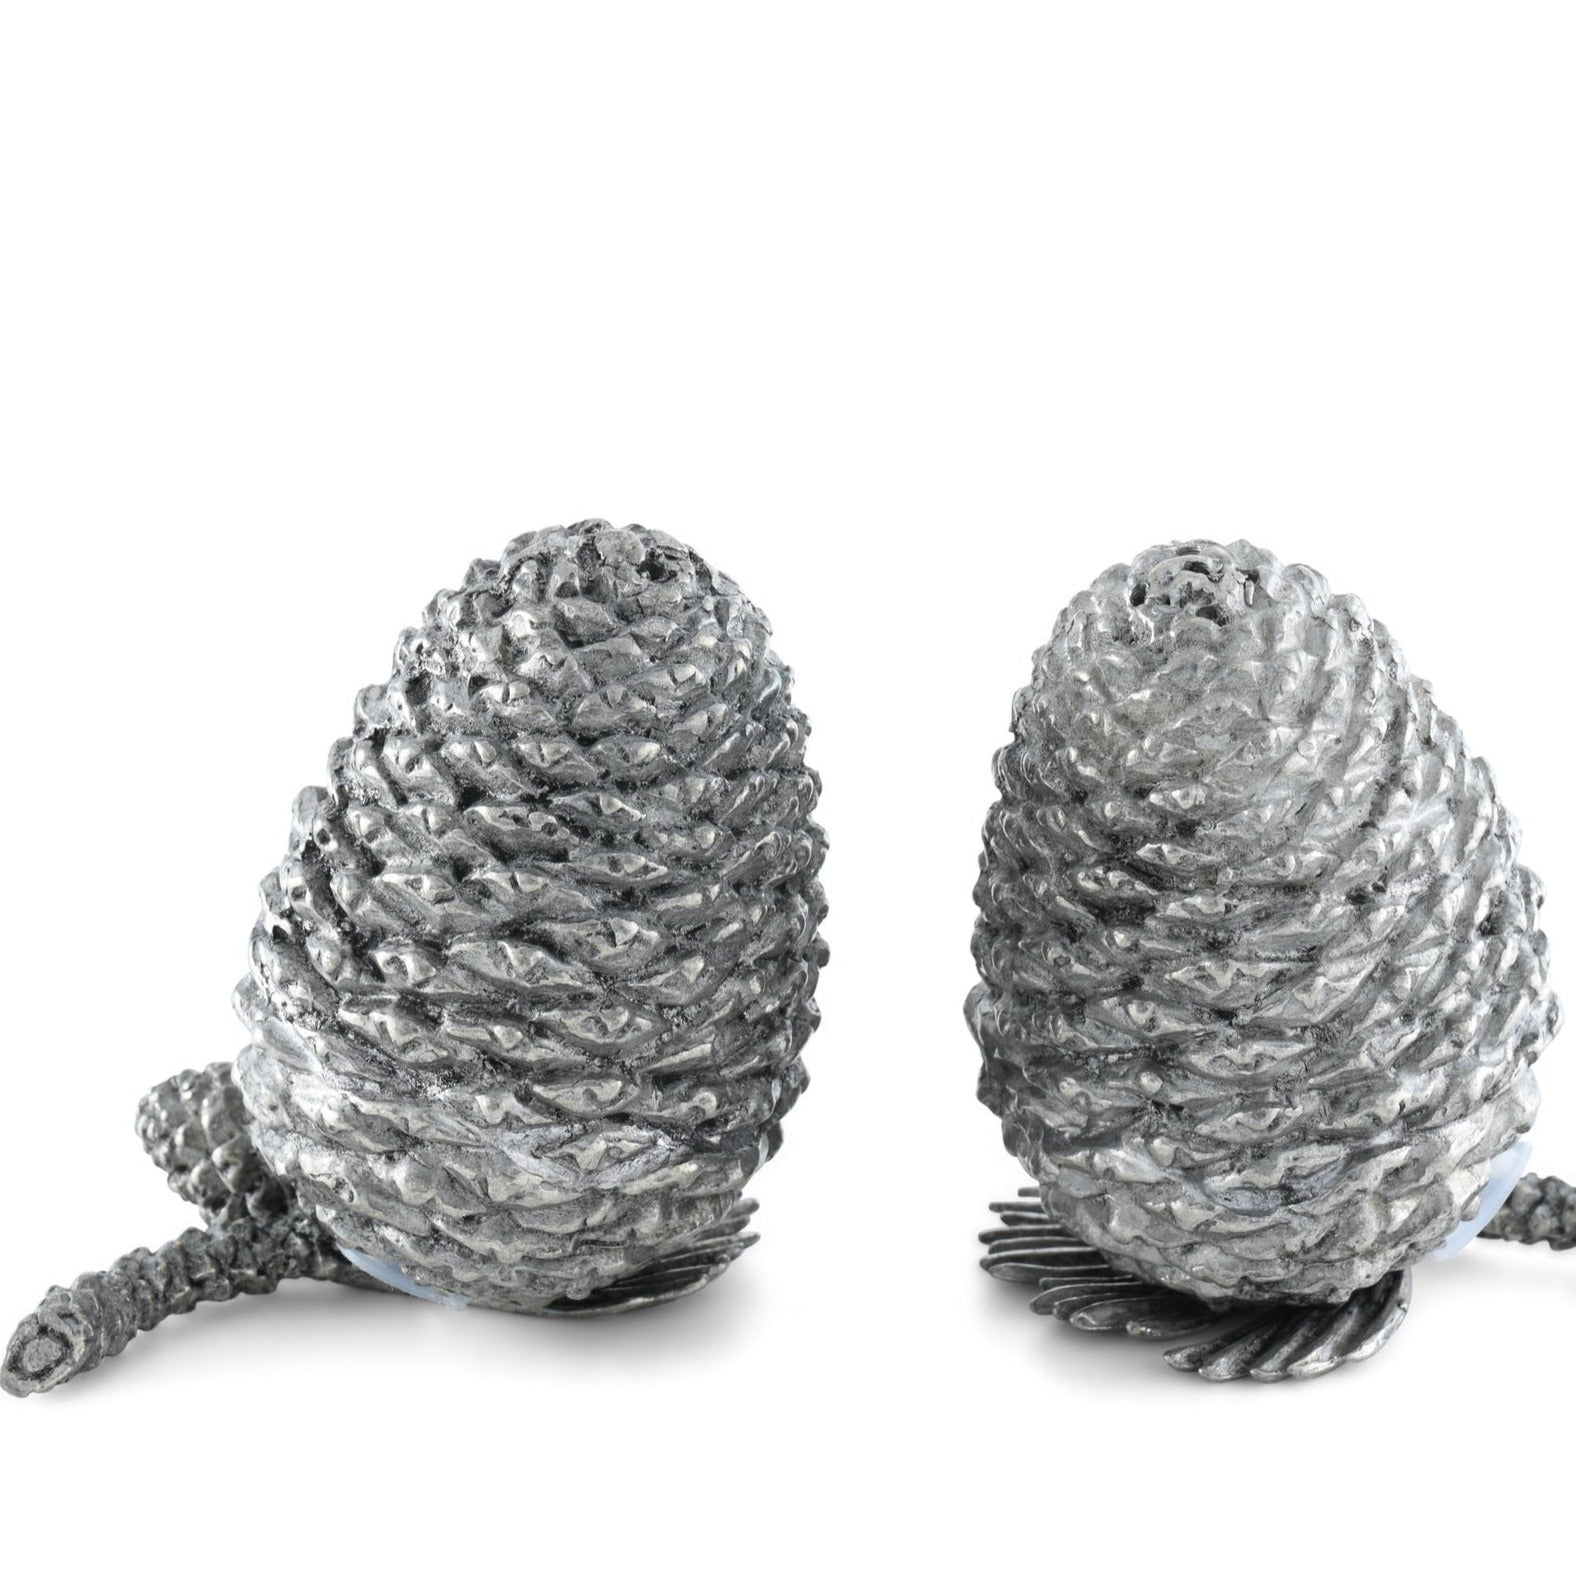 Pewter Majestic Pinecones Salt and Pepper Timothy De Clue Collection